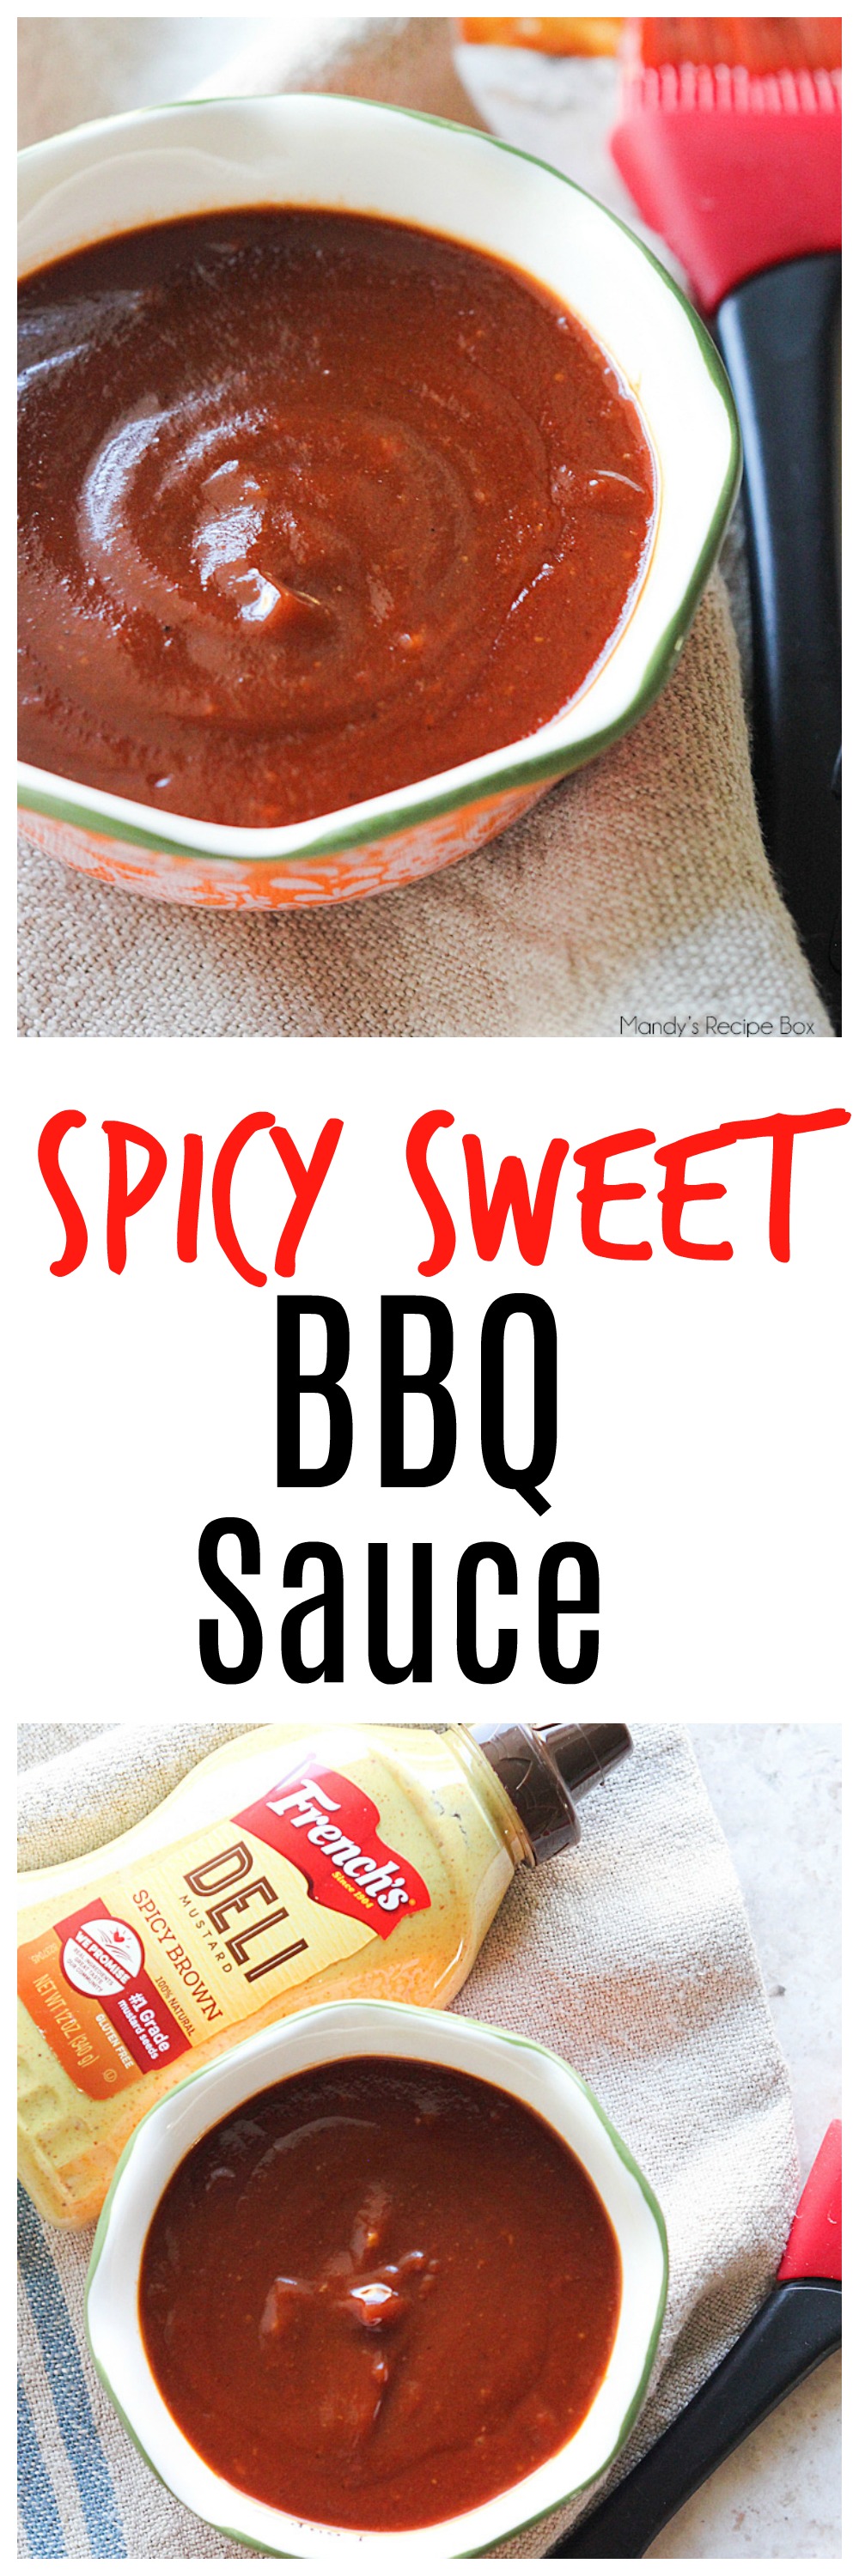 Spicy Sweet BBQ Sauce